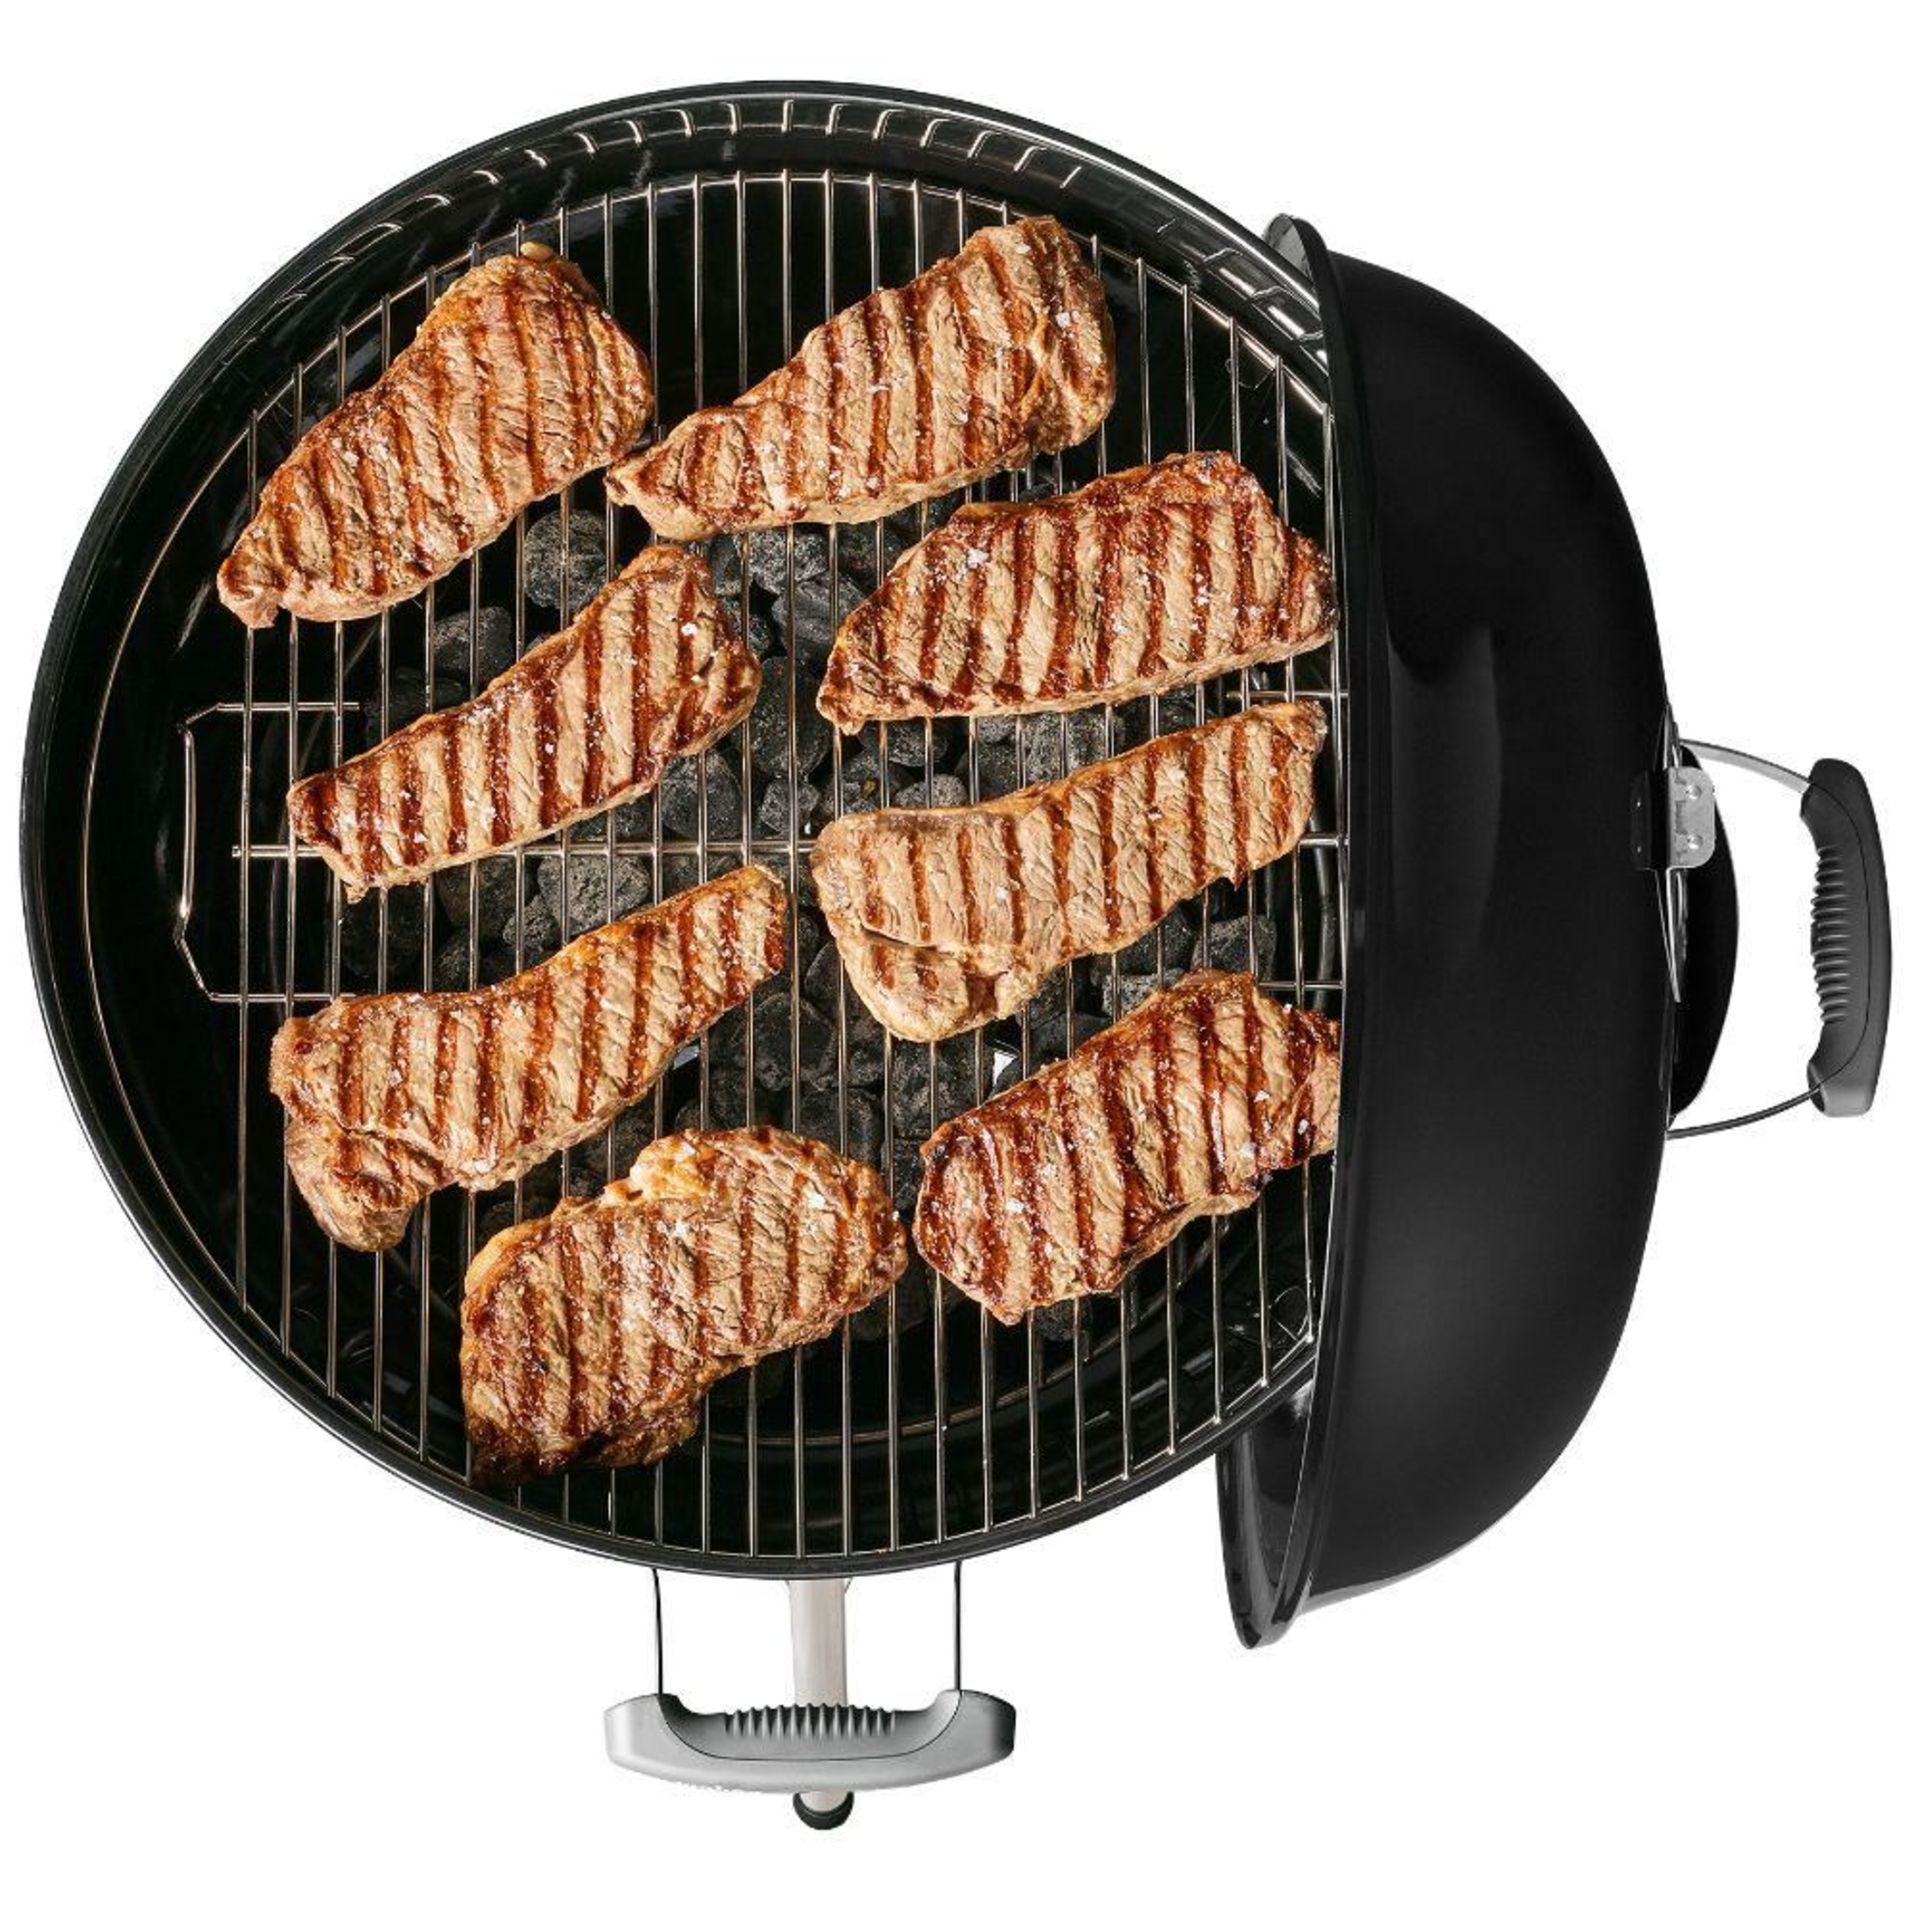 Weber 22 inch Original Kettle Charcoal Grill in Black - Image 3 of 3